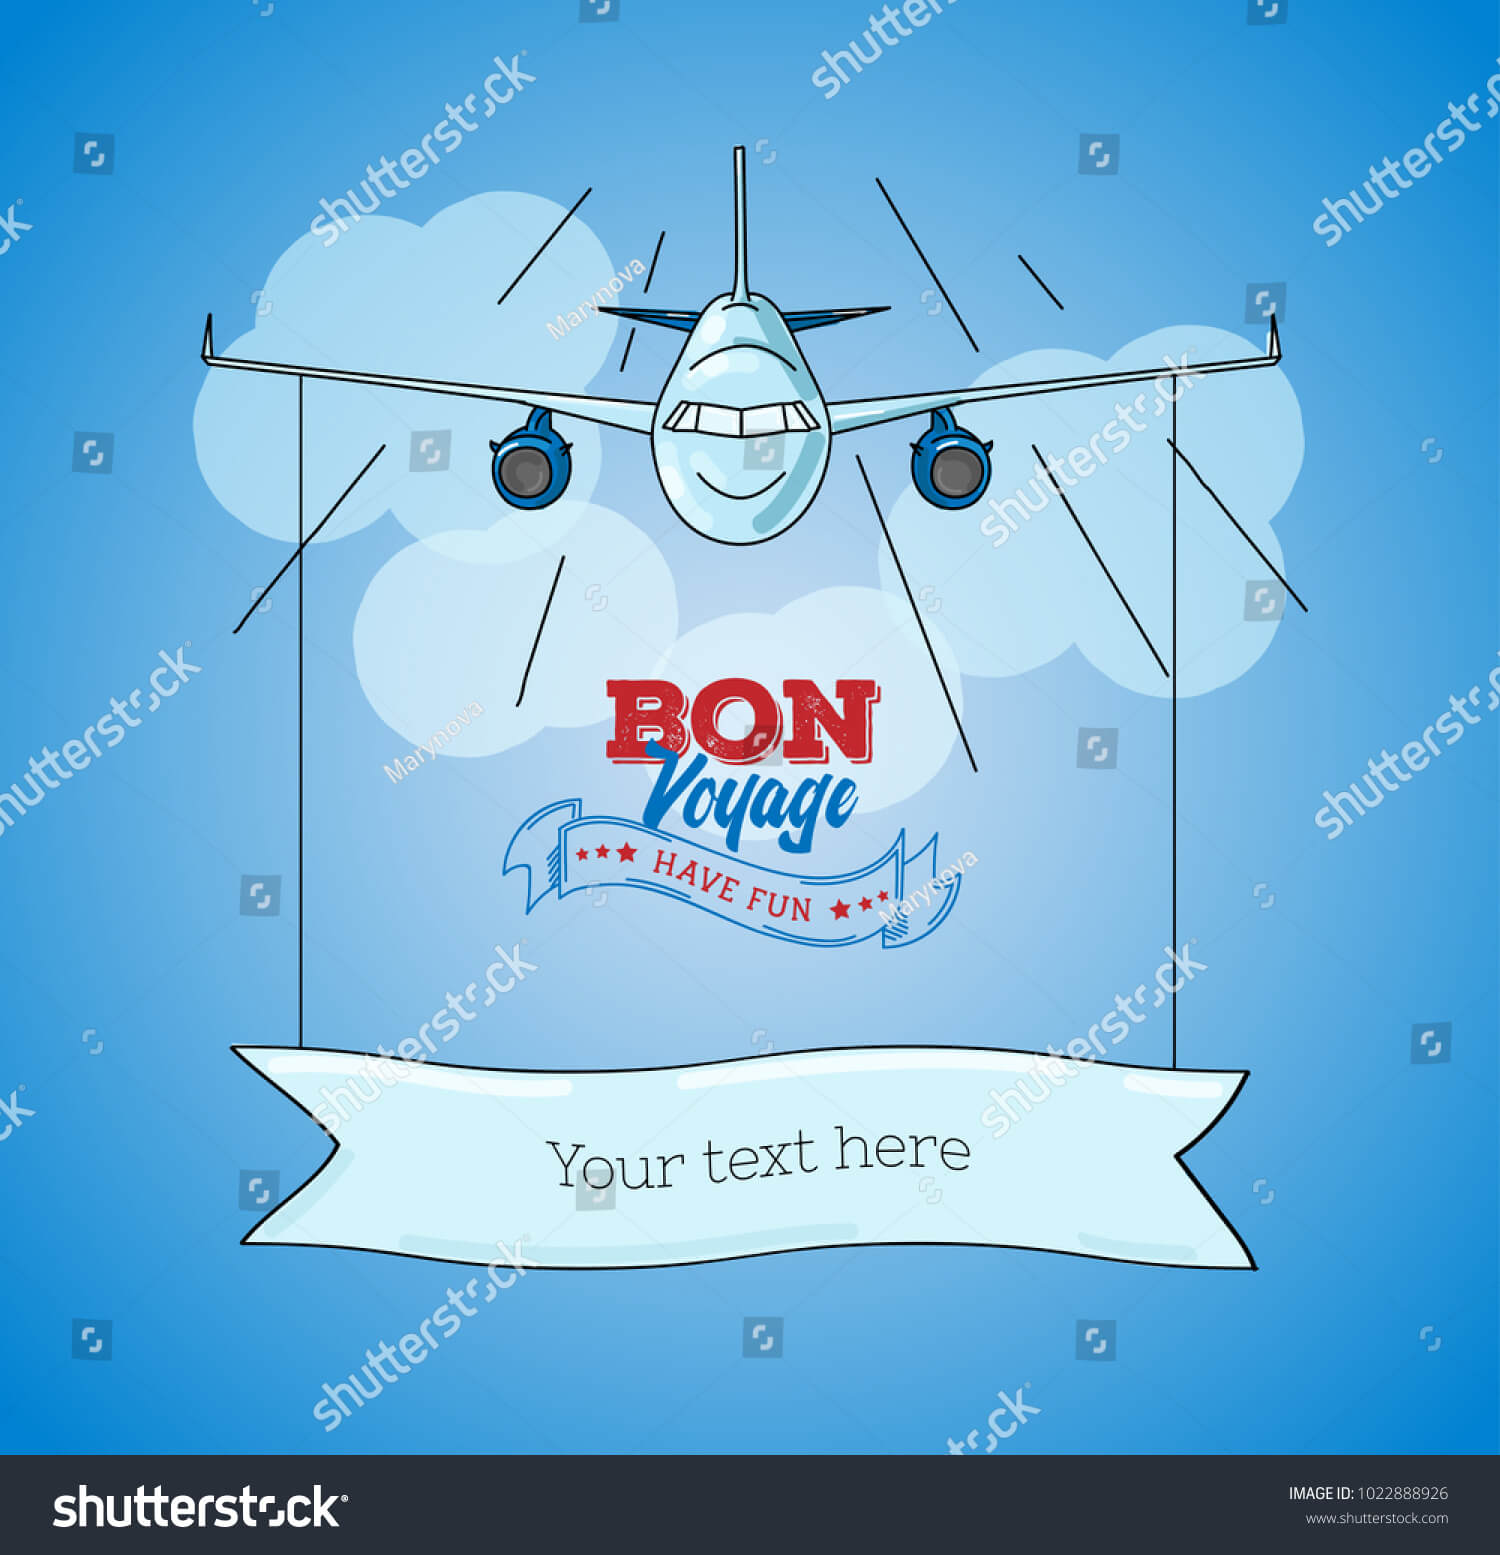 Card Template Plane Graphic Illustration On Stock Vector With Regard To Bon Voyage Card Template